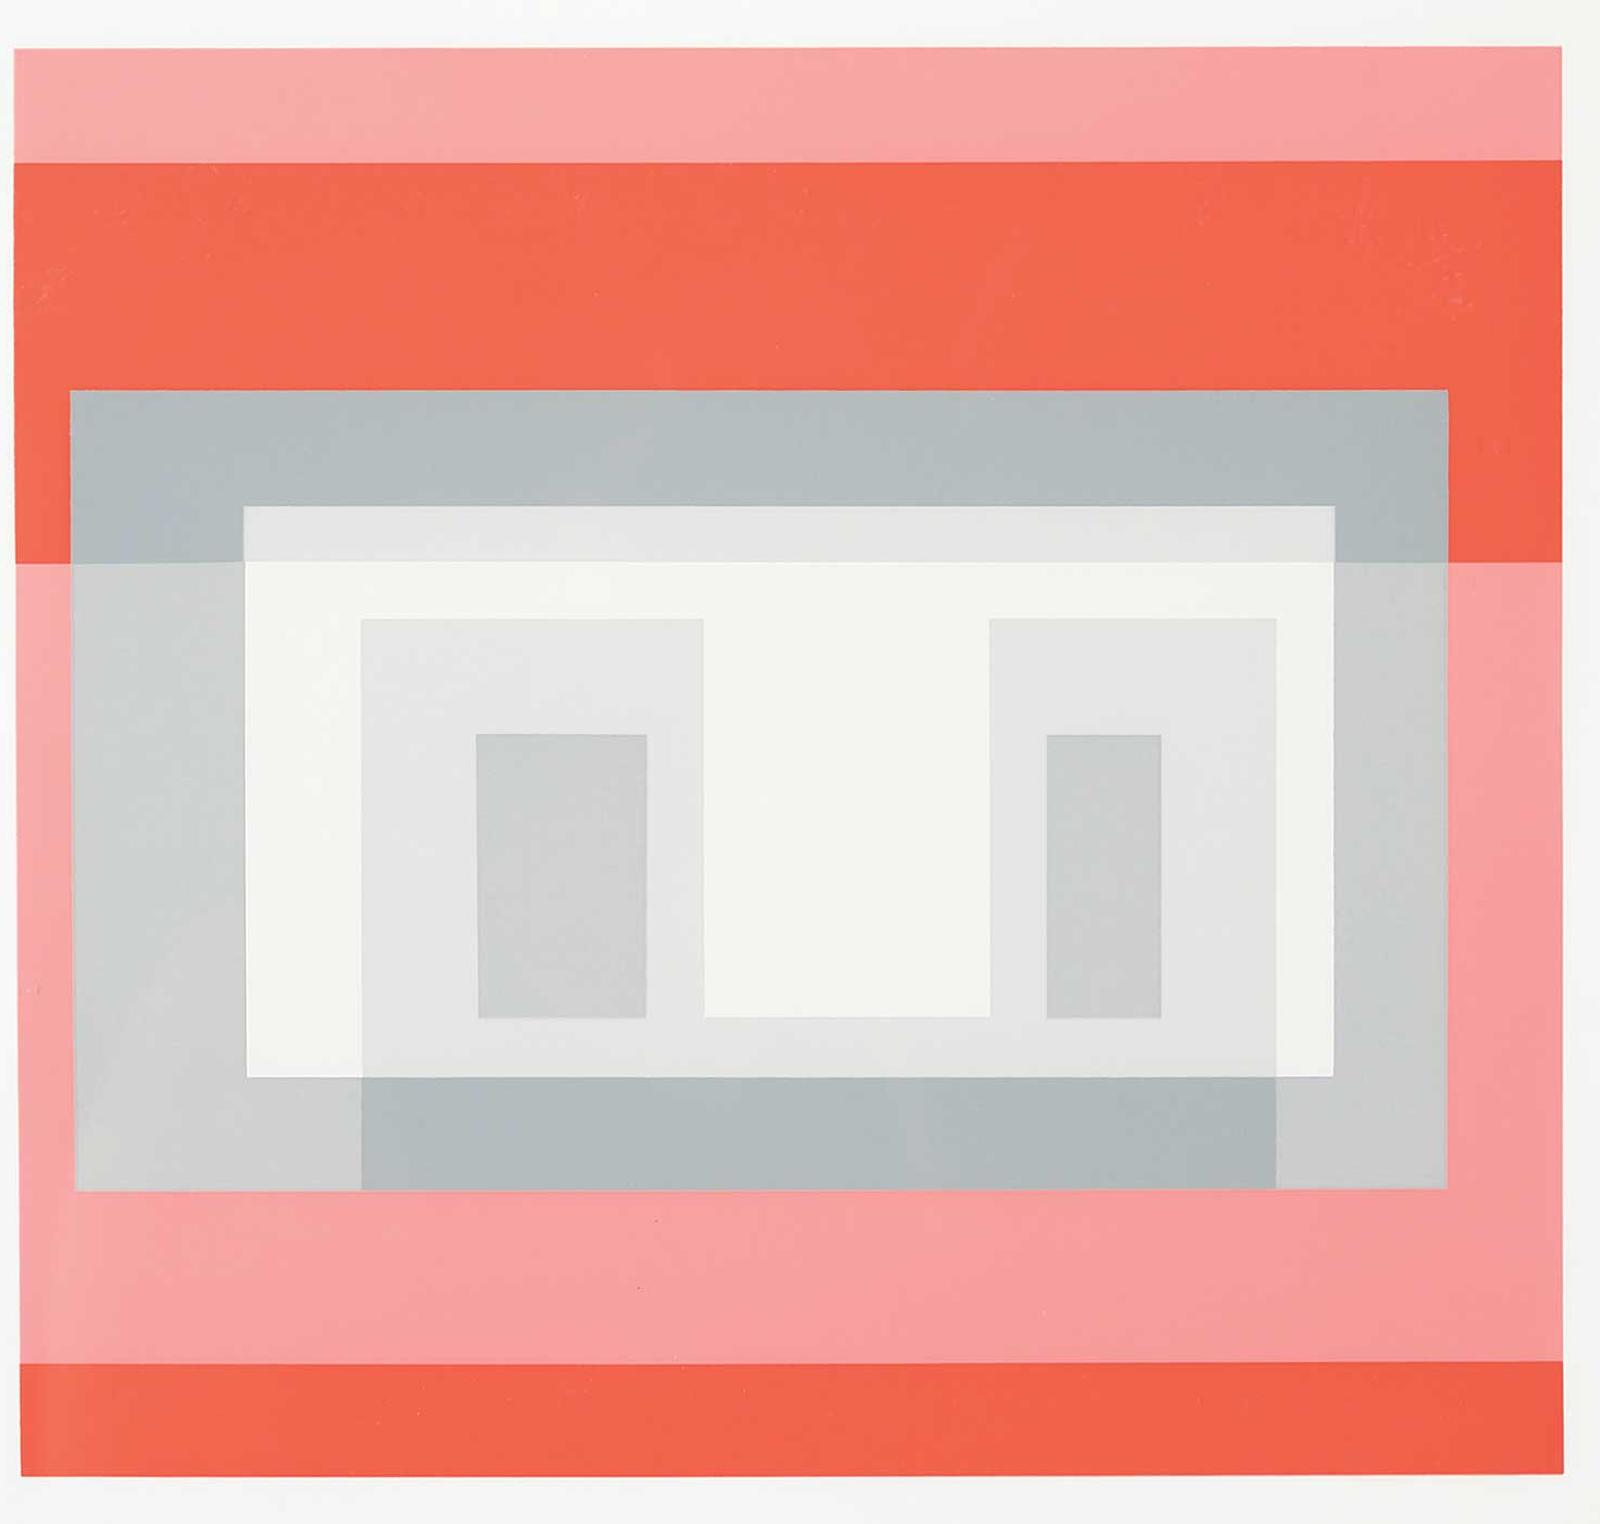 Josef Albers (1888-1976) - Untitled - Variants [VI], Greys and Reds